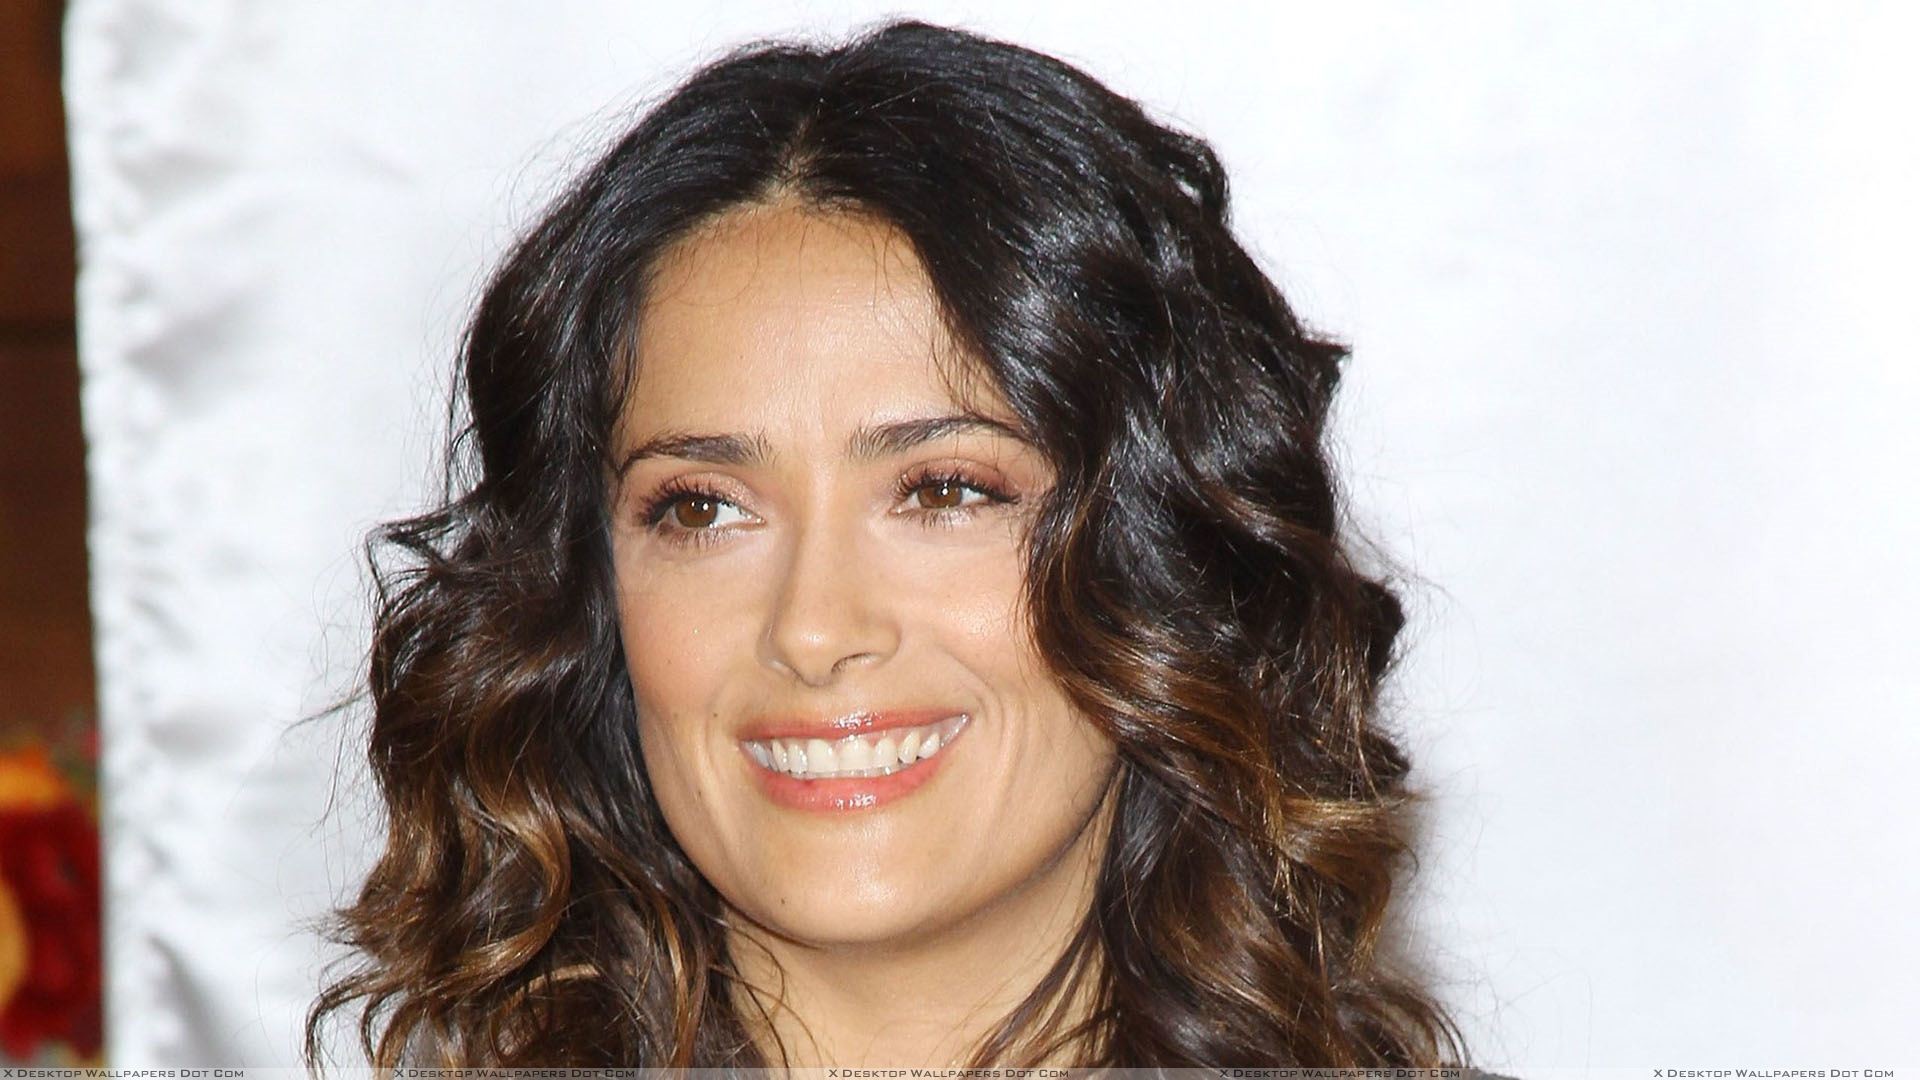 1920x1080 You are viewing wallpaper titled "Salma Hayek ...